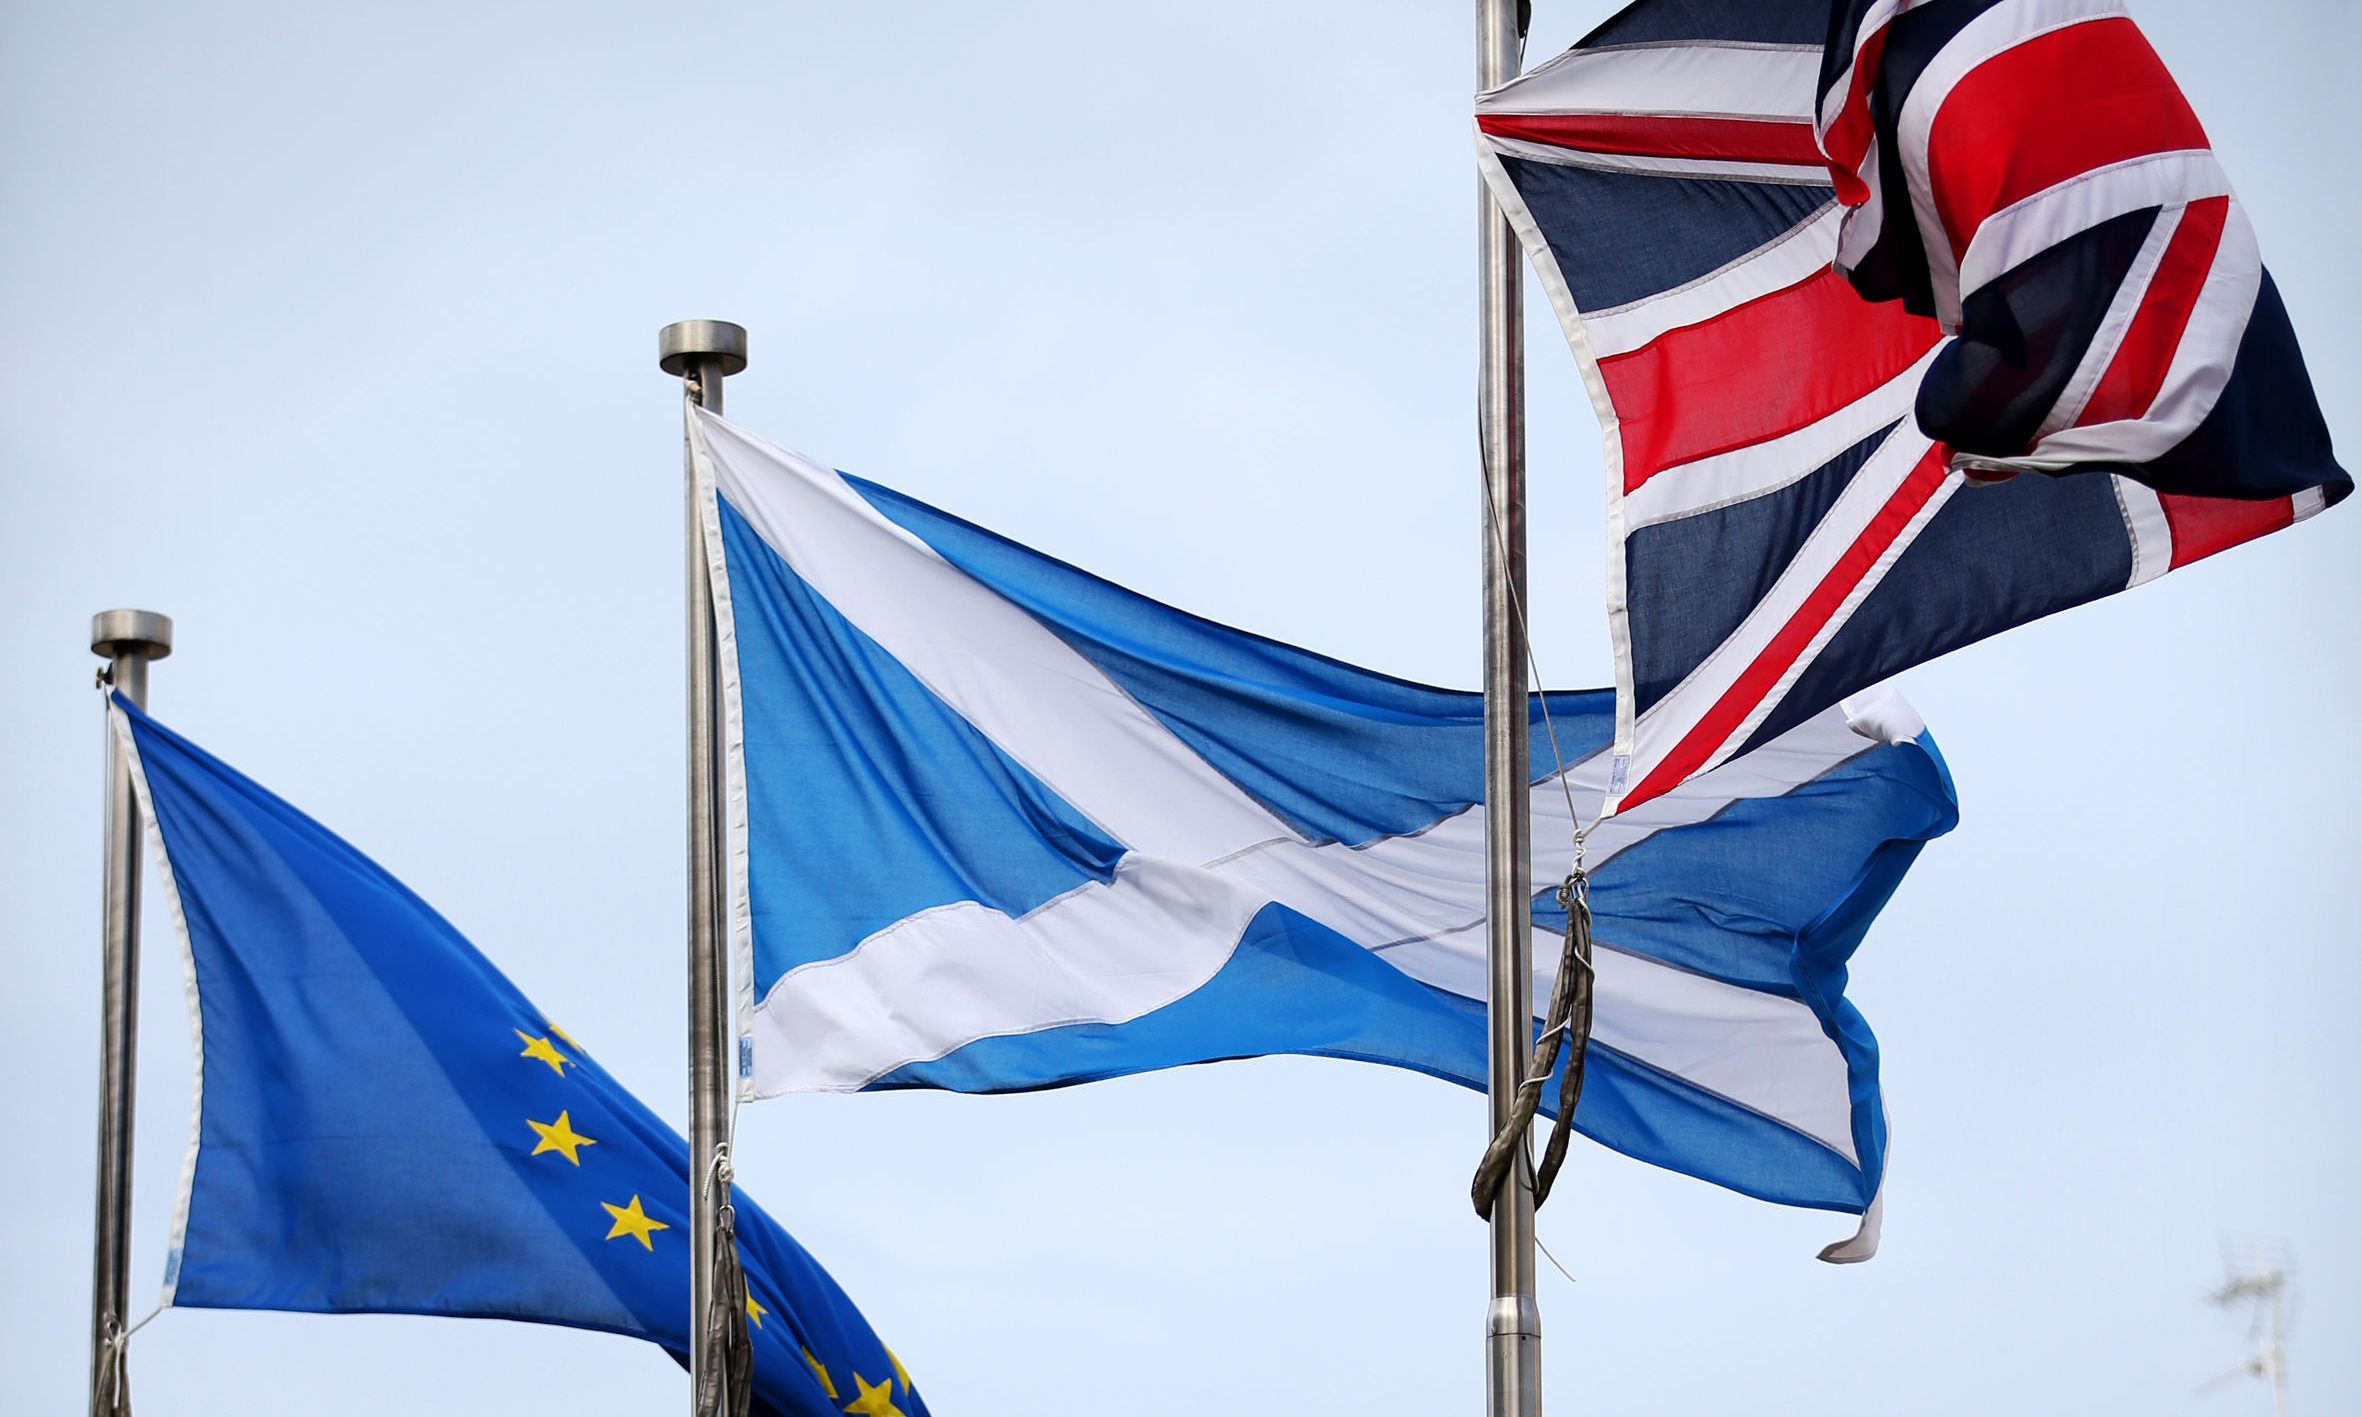 Nicola Sturgeon wants an independence vote by 2021 to avert Brexit disaster.